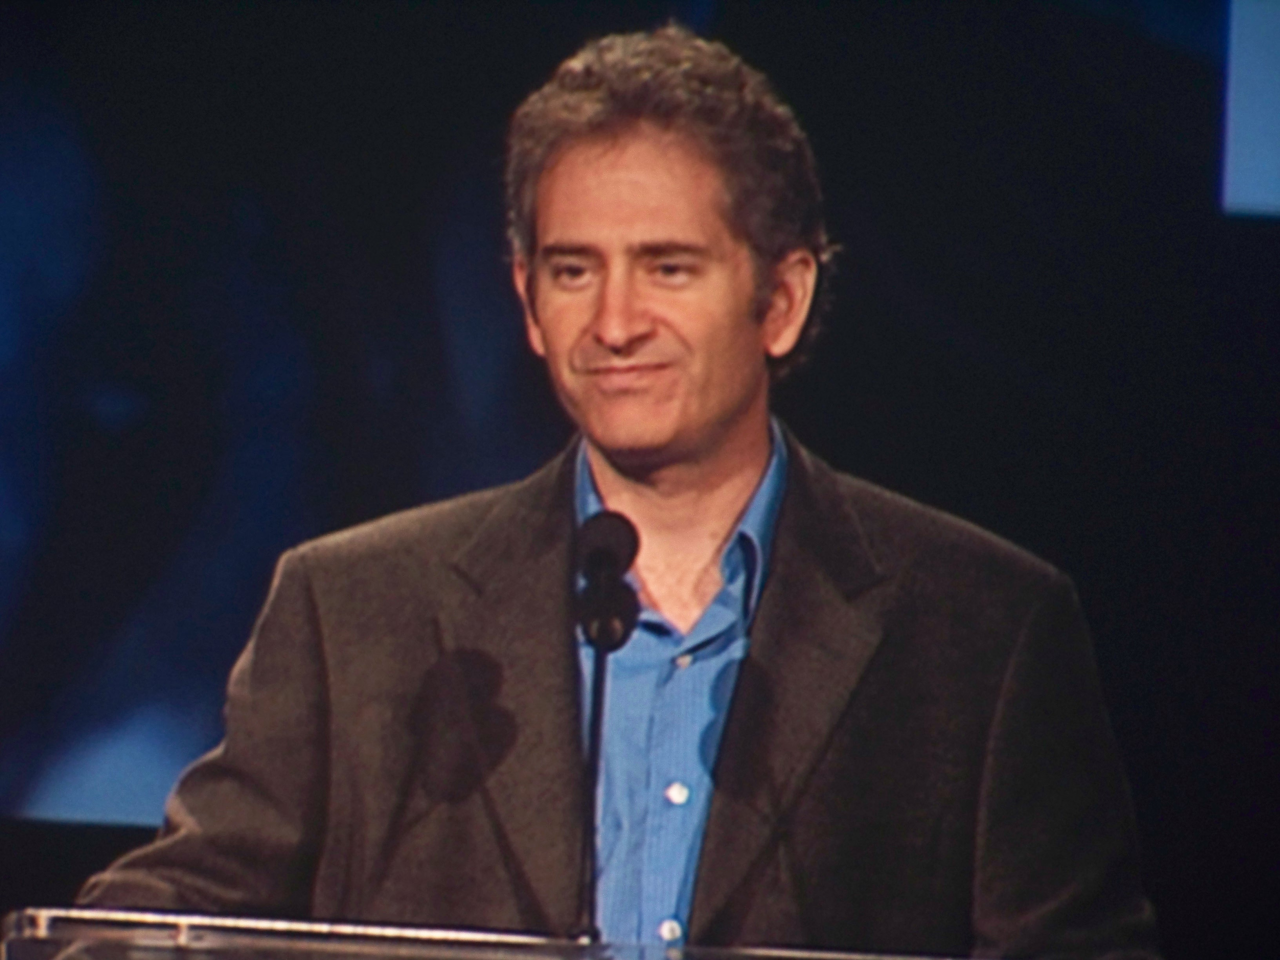 Mike Morhaime - CEO and Co-Founder of Blizzard